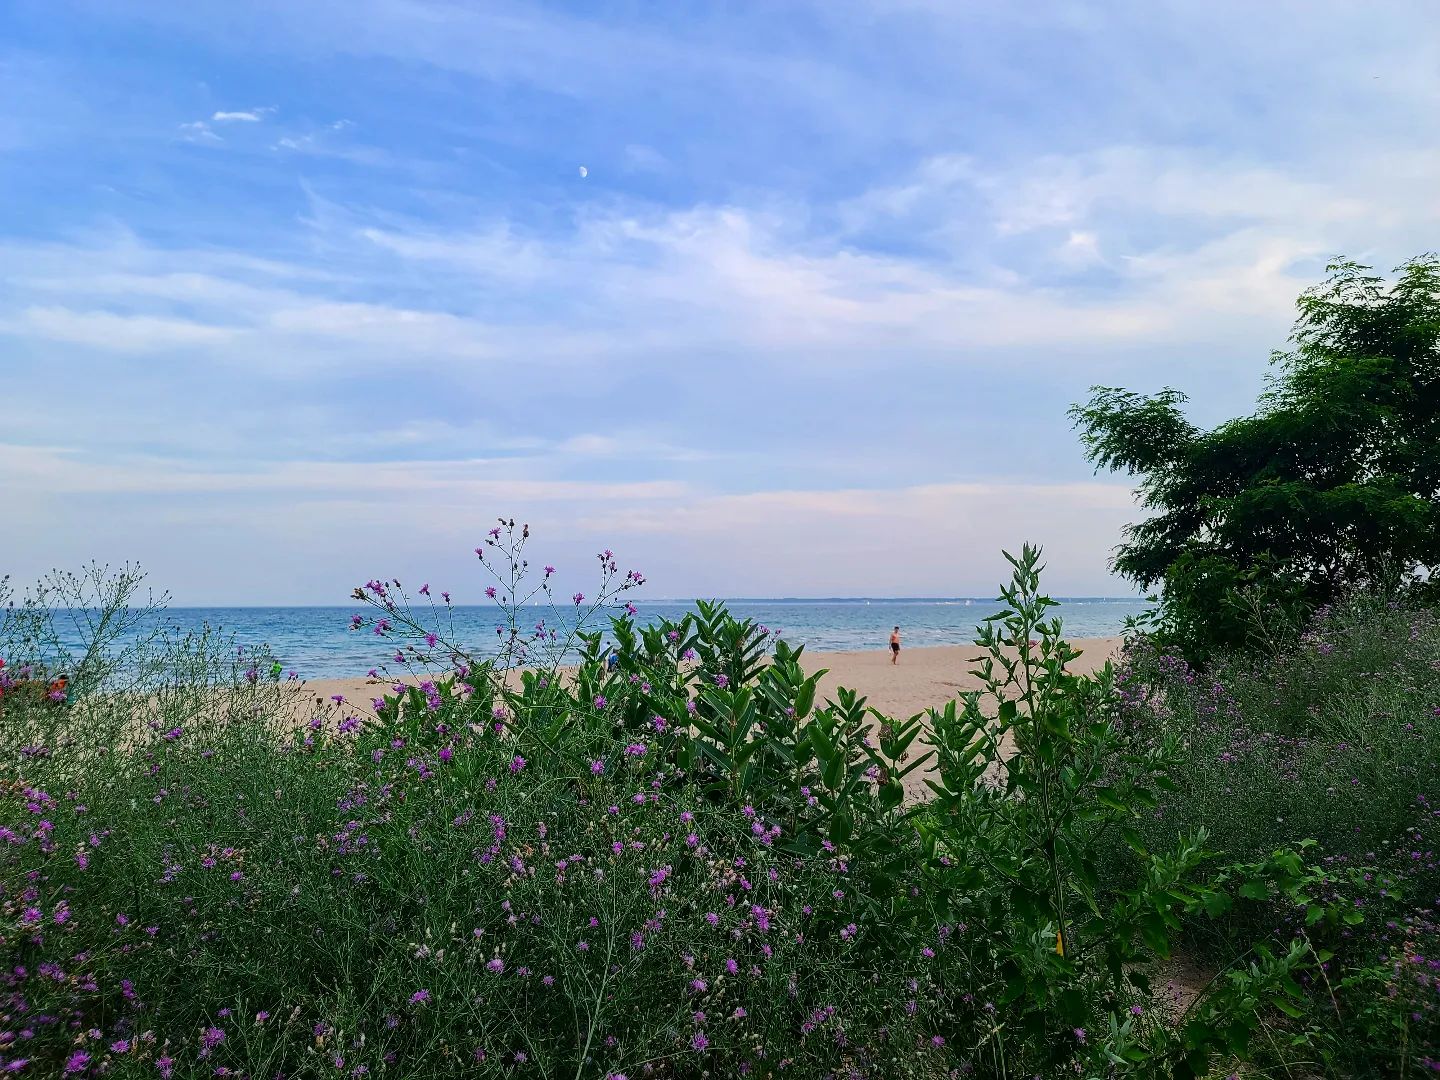 Lake Michigan Beach near Wauwatosa, WI. There's brush in the foreground and the lake in the background.